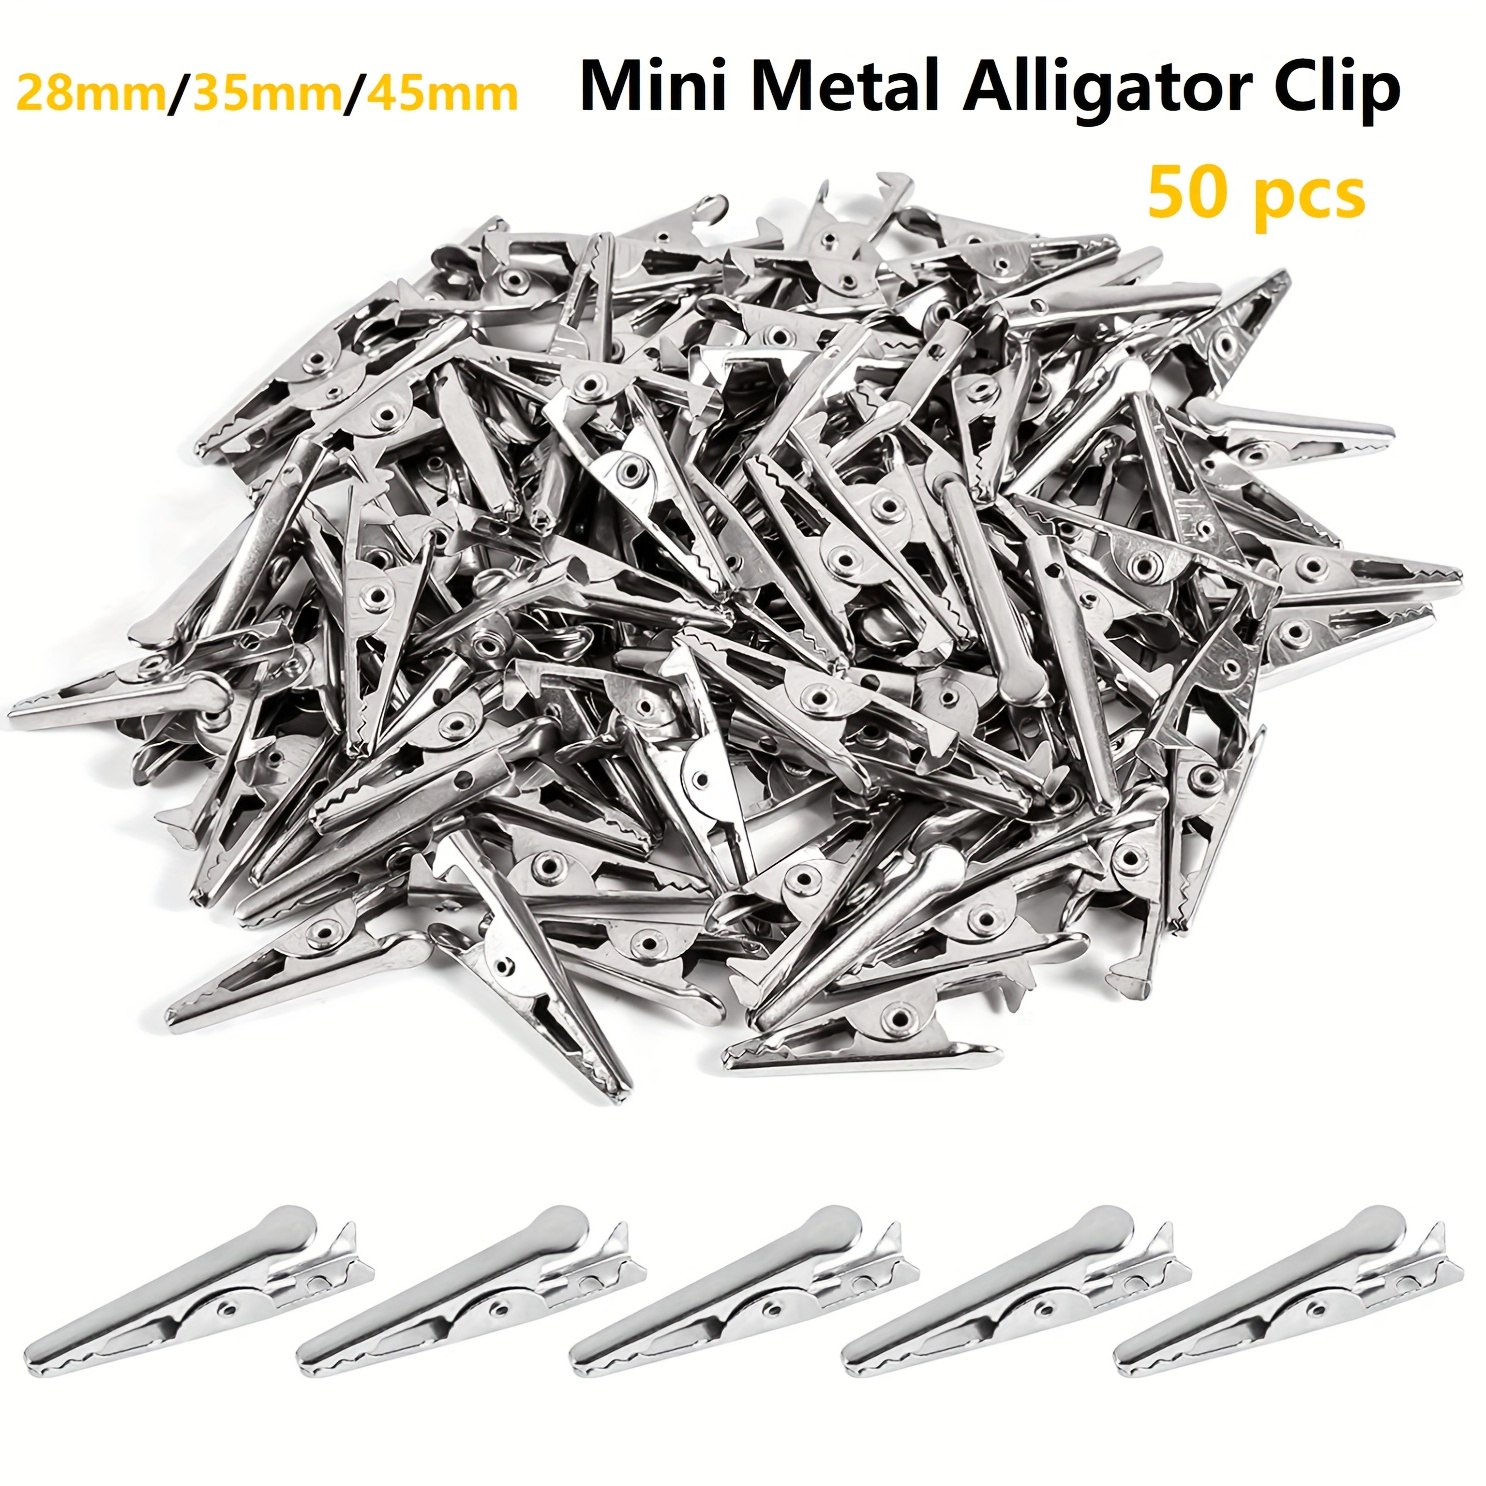 20 pcs Replacement Clamps For Crafts Small Clamps Alligator Clips For Crafts